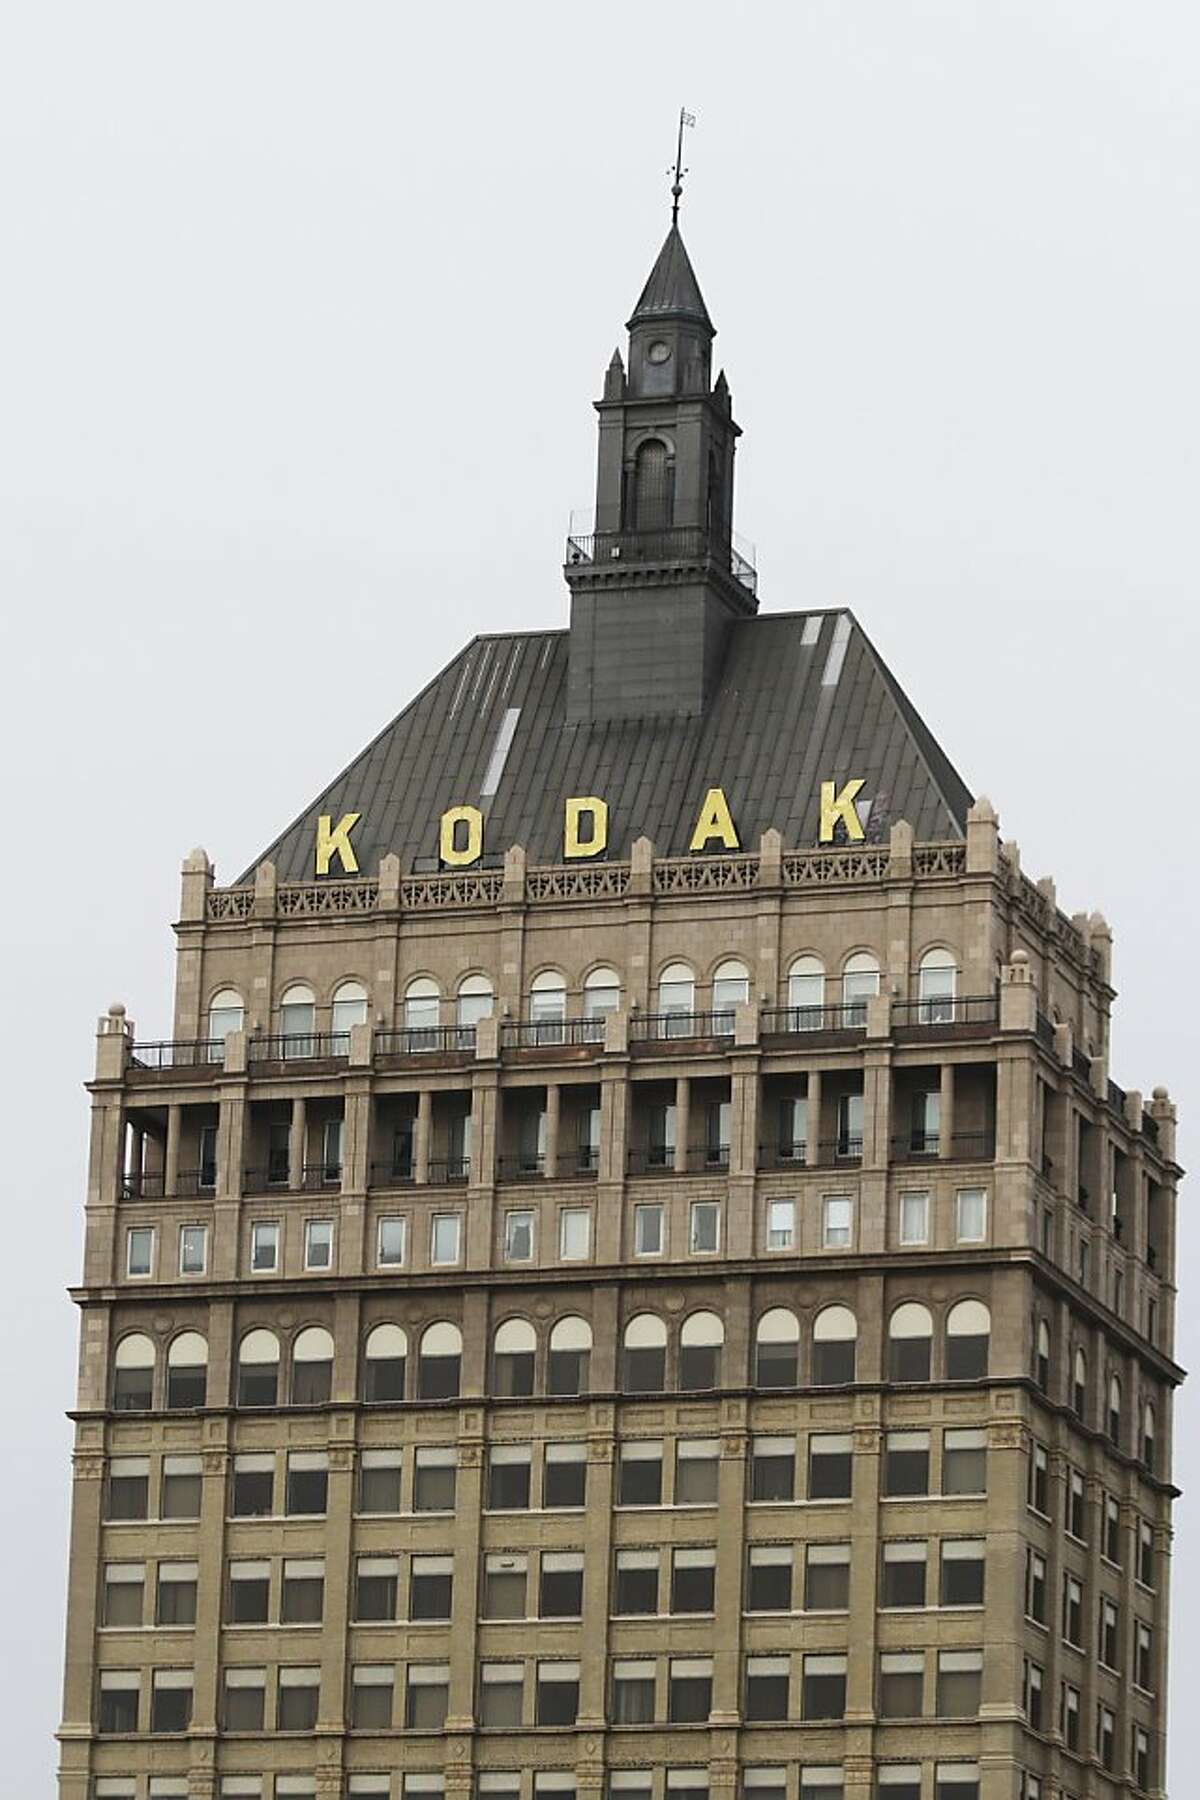 ROCHESTER, NY - JANUARY 19: Kodak World Headquarters stands January 19, 2011 in Rochester, New York. Kodak, once the powerhouse in photography, filed for protection from its creditors under Chapter 11 of the U.S. Bankruptcy Code. (Photo by Guy Solimano/Getty Images)